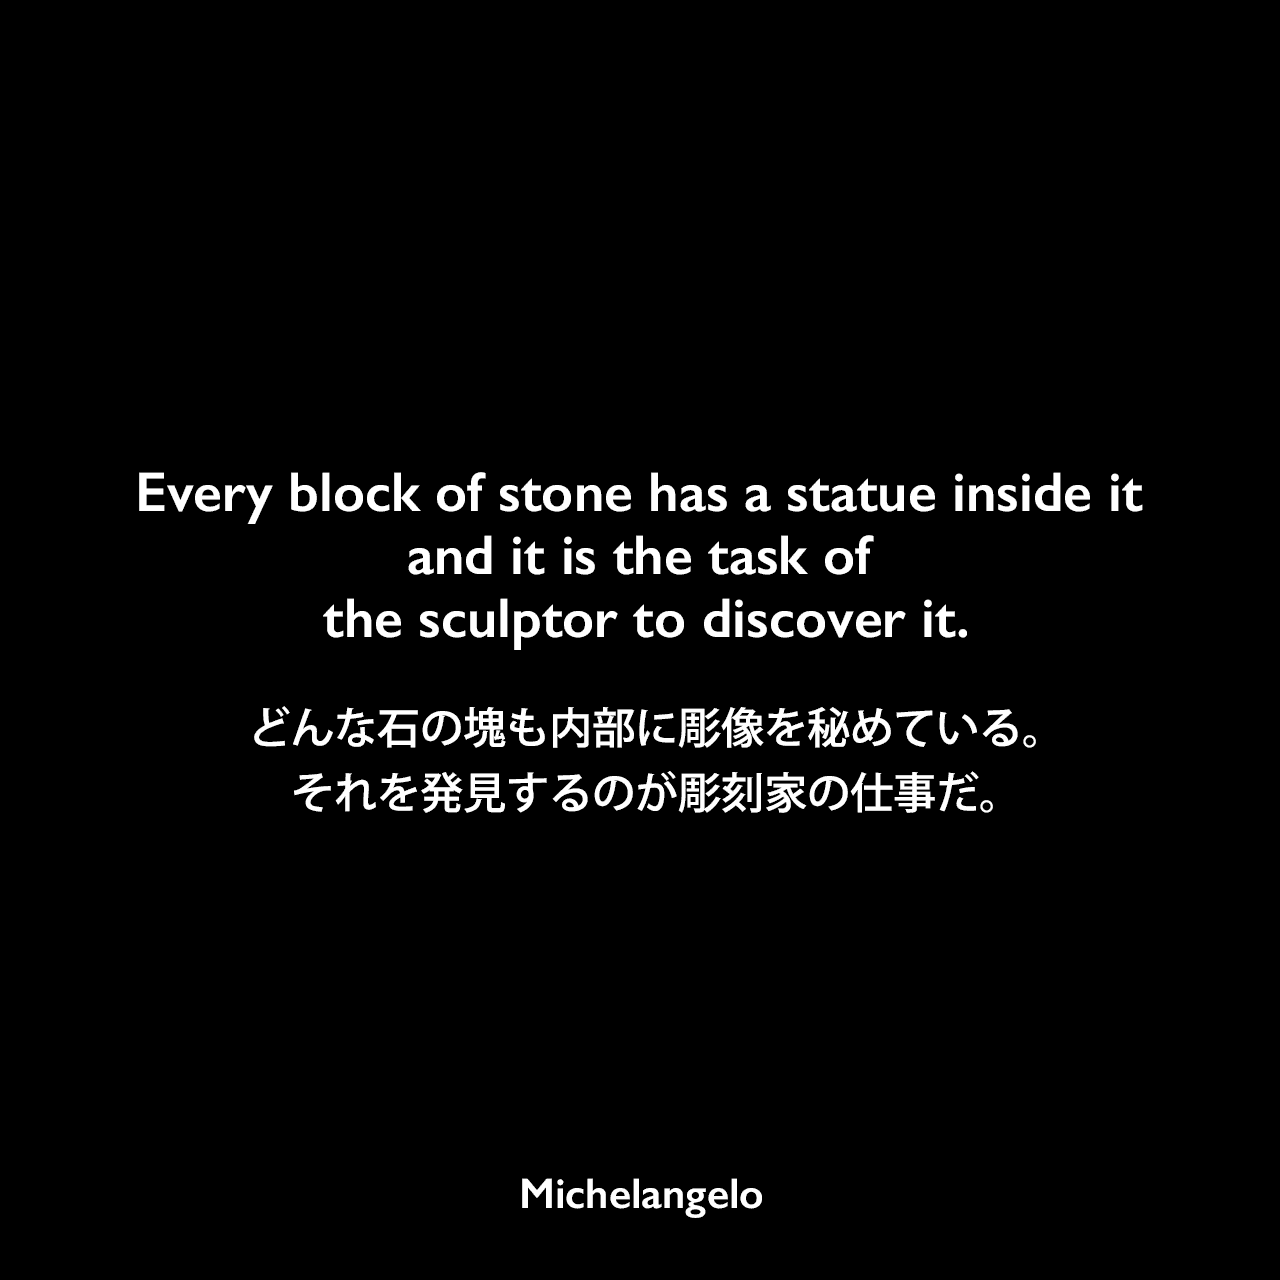 Every block of stone has a statue inside it and it is the task of the sculptor to discover it.どんな石の塊も内部に彫像を秘めている。それを発見するのが彫刻家の仕事だ。Michelangelo